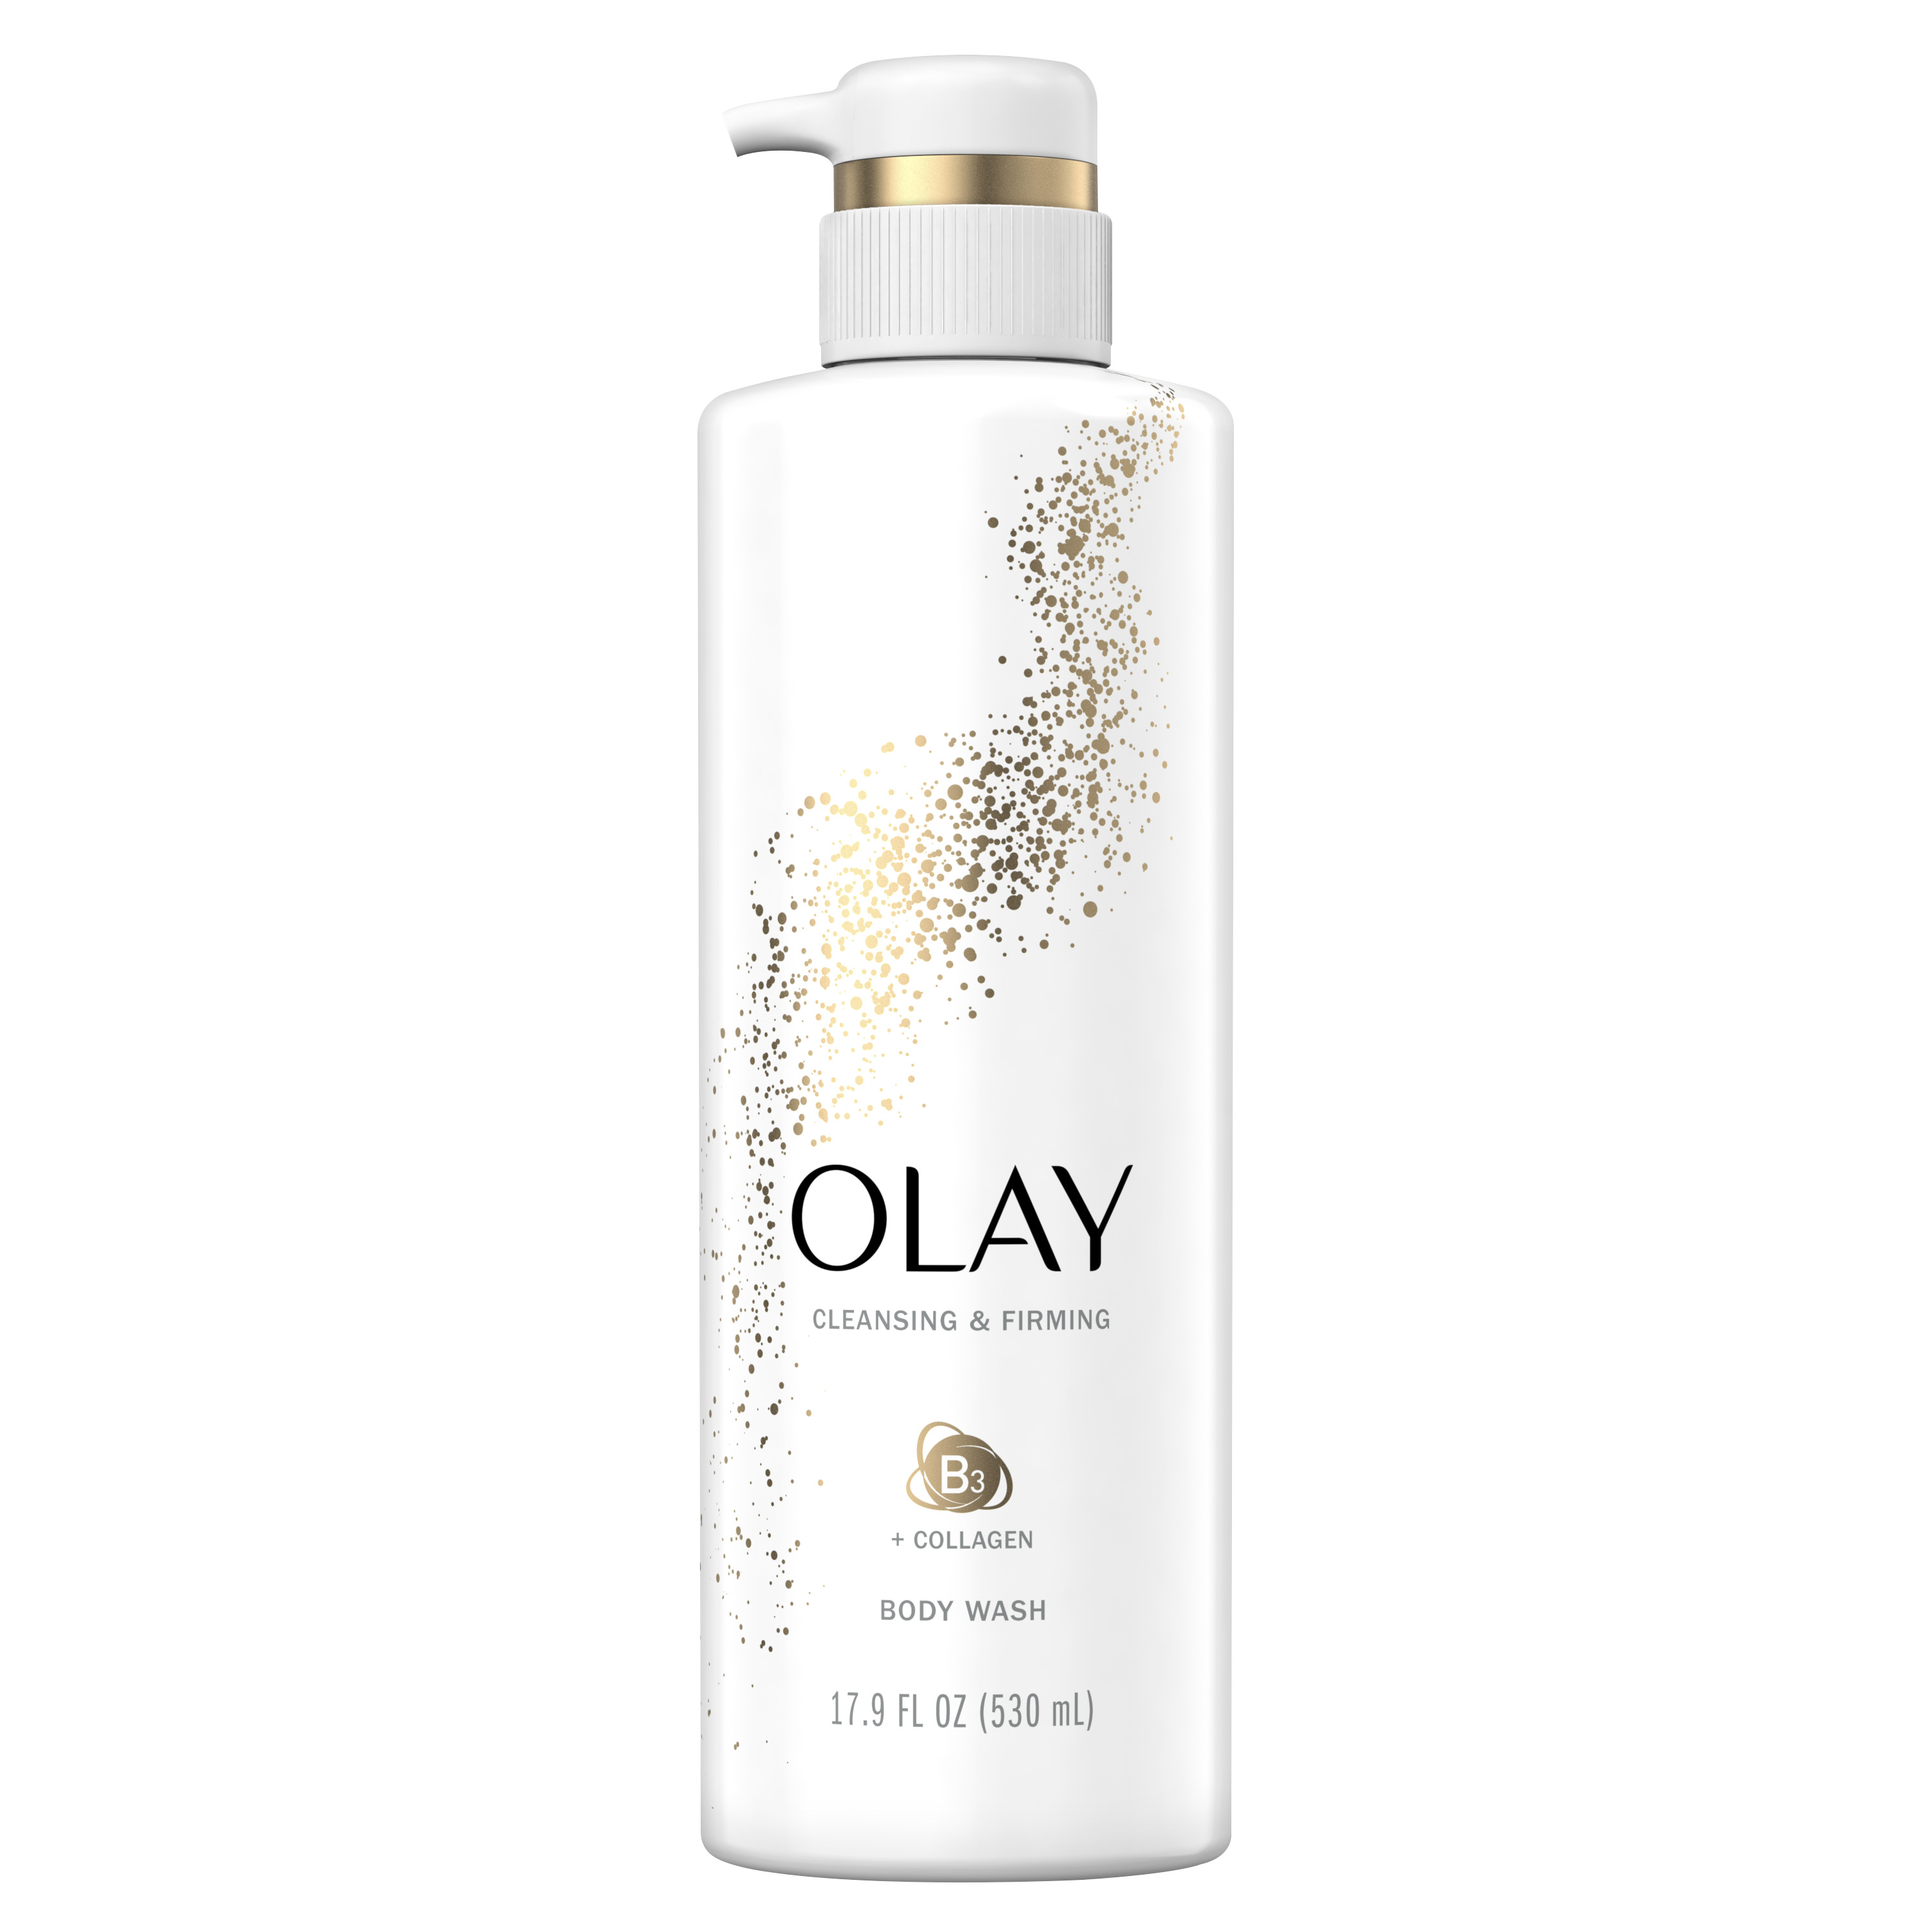 Olay Cleansing & Firming Body Wash with Vitamin B3 and Collagen, 17.9 fl oz - image 1 of 7